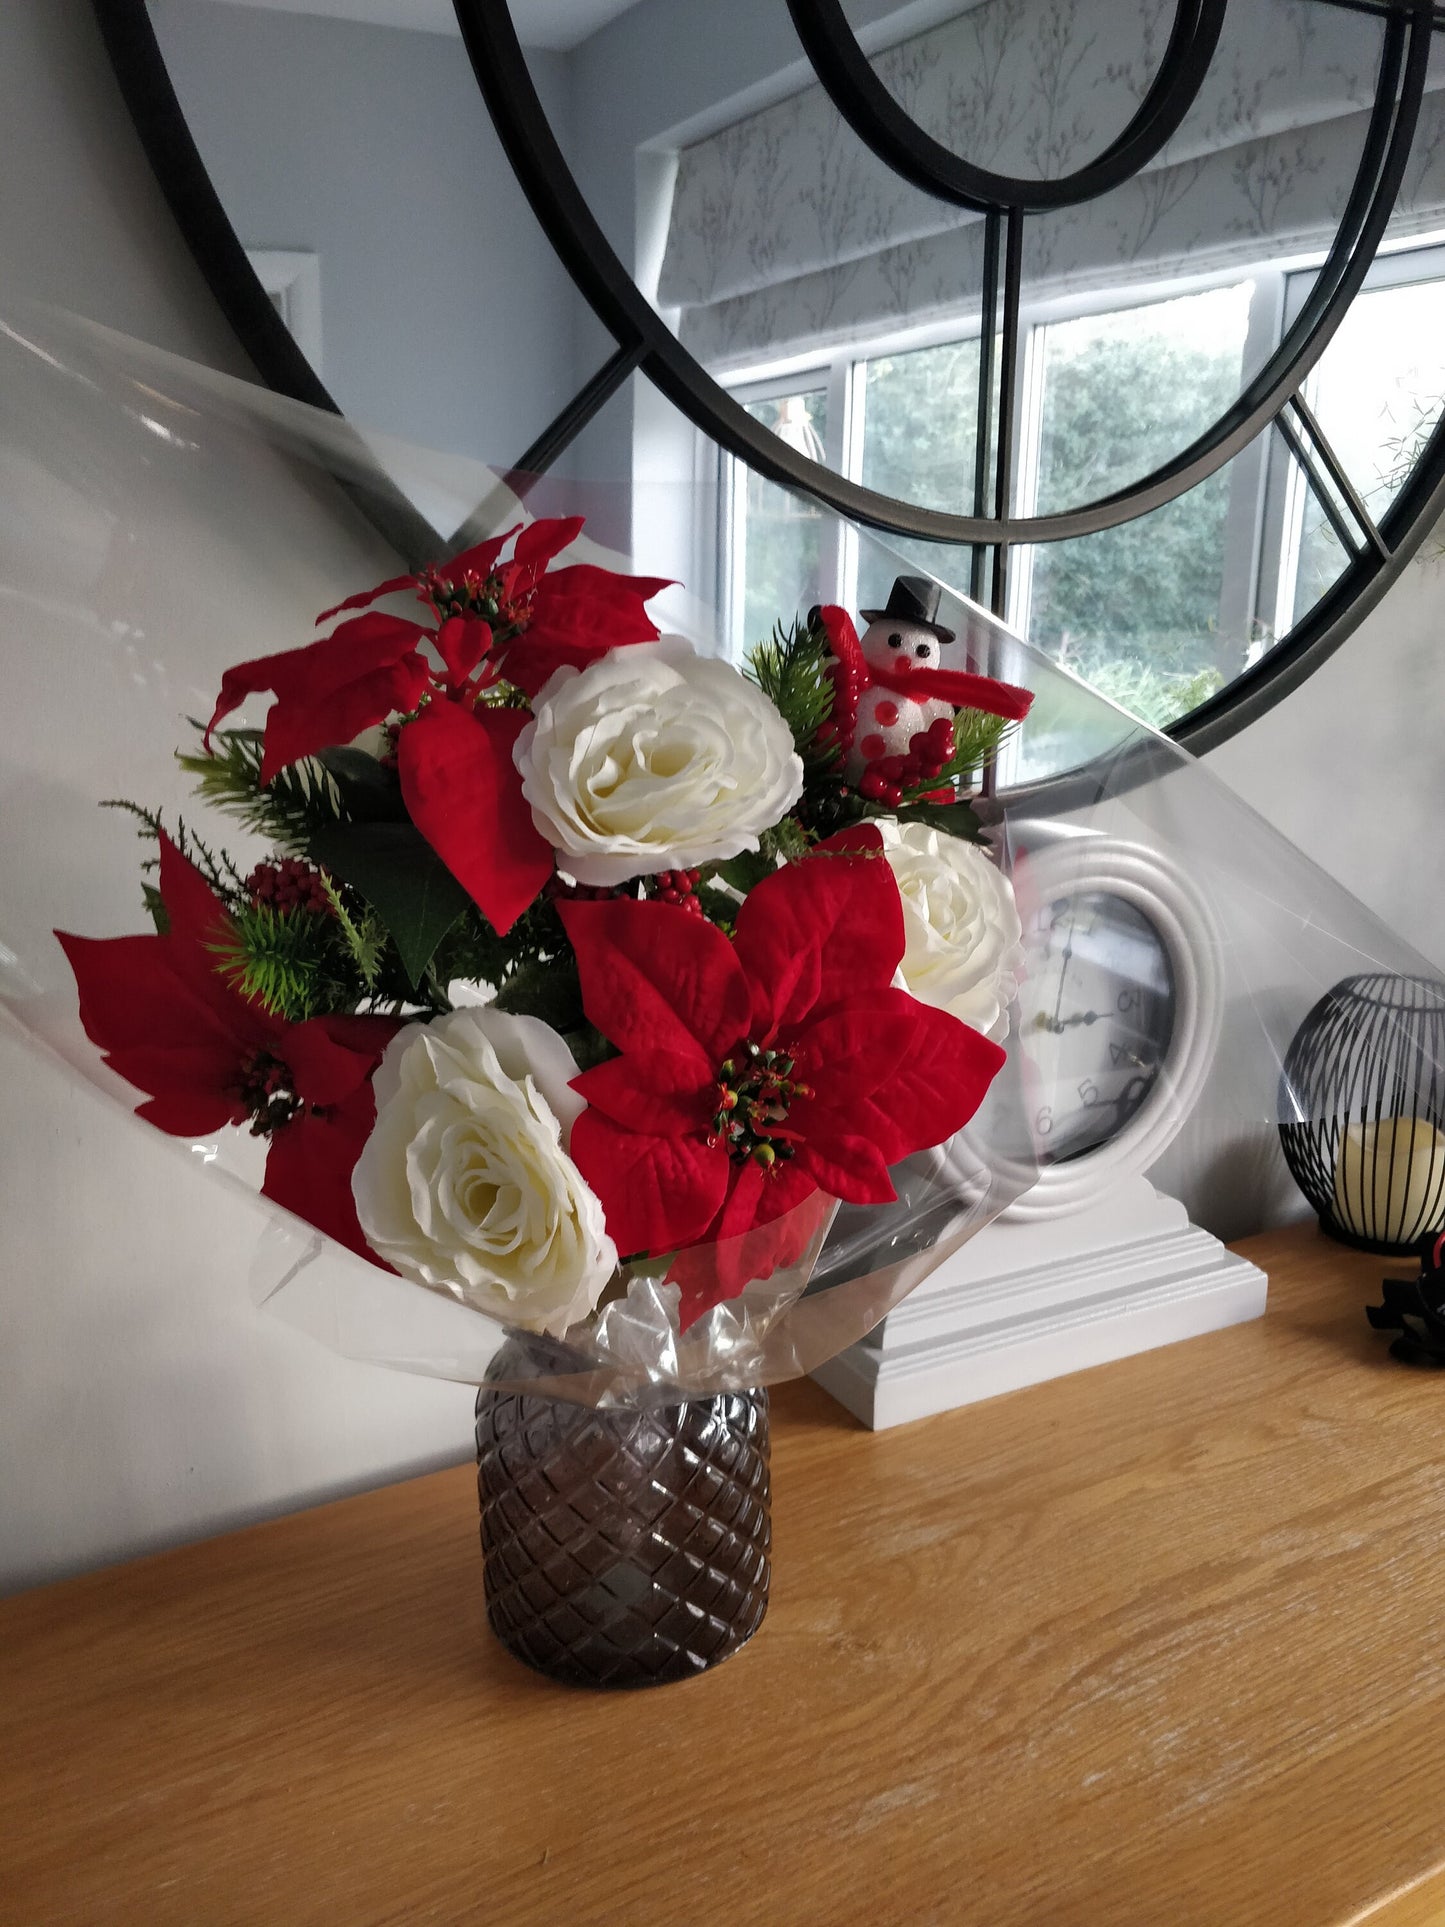 Artificial Flower Christmas Bouquet - Poinsettias, Roses, Holly and Berries